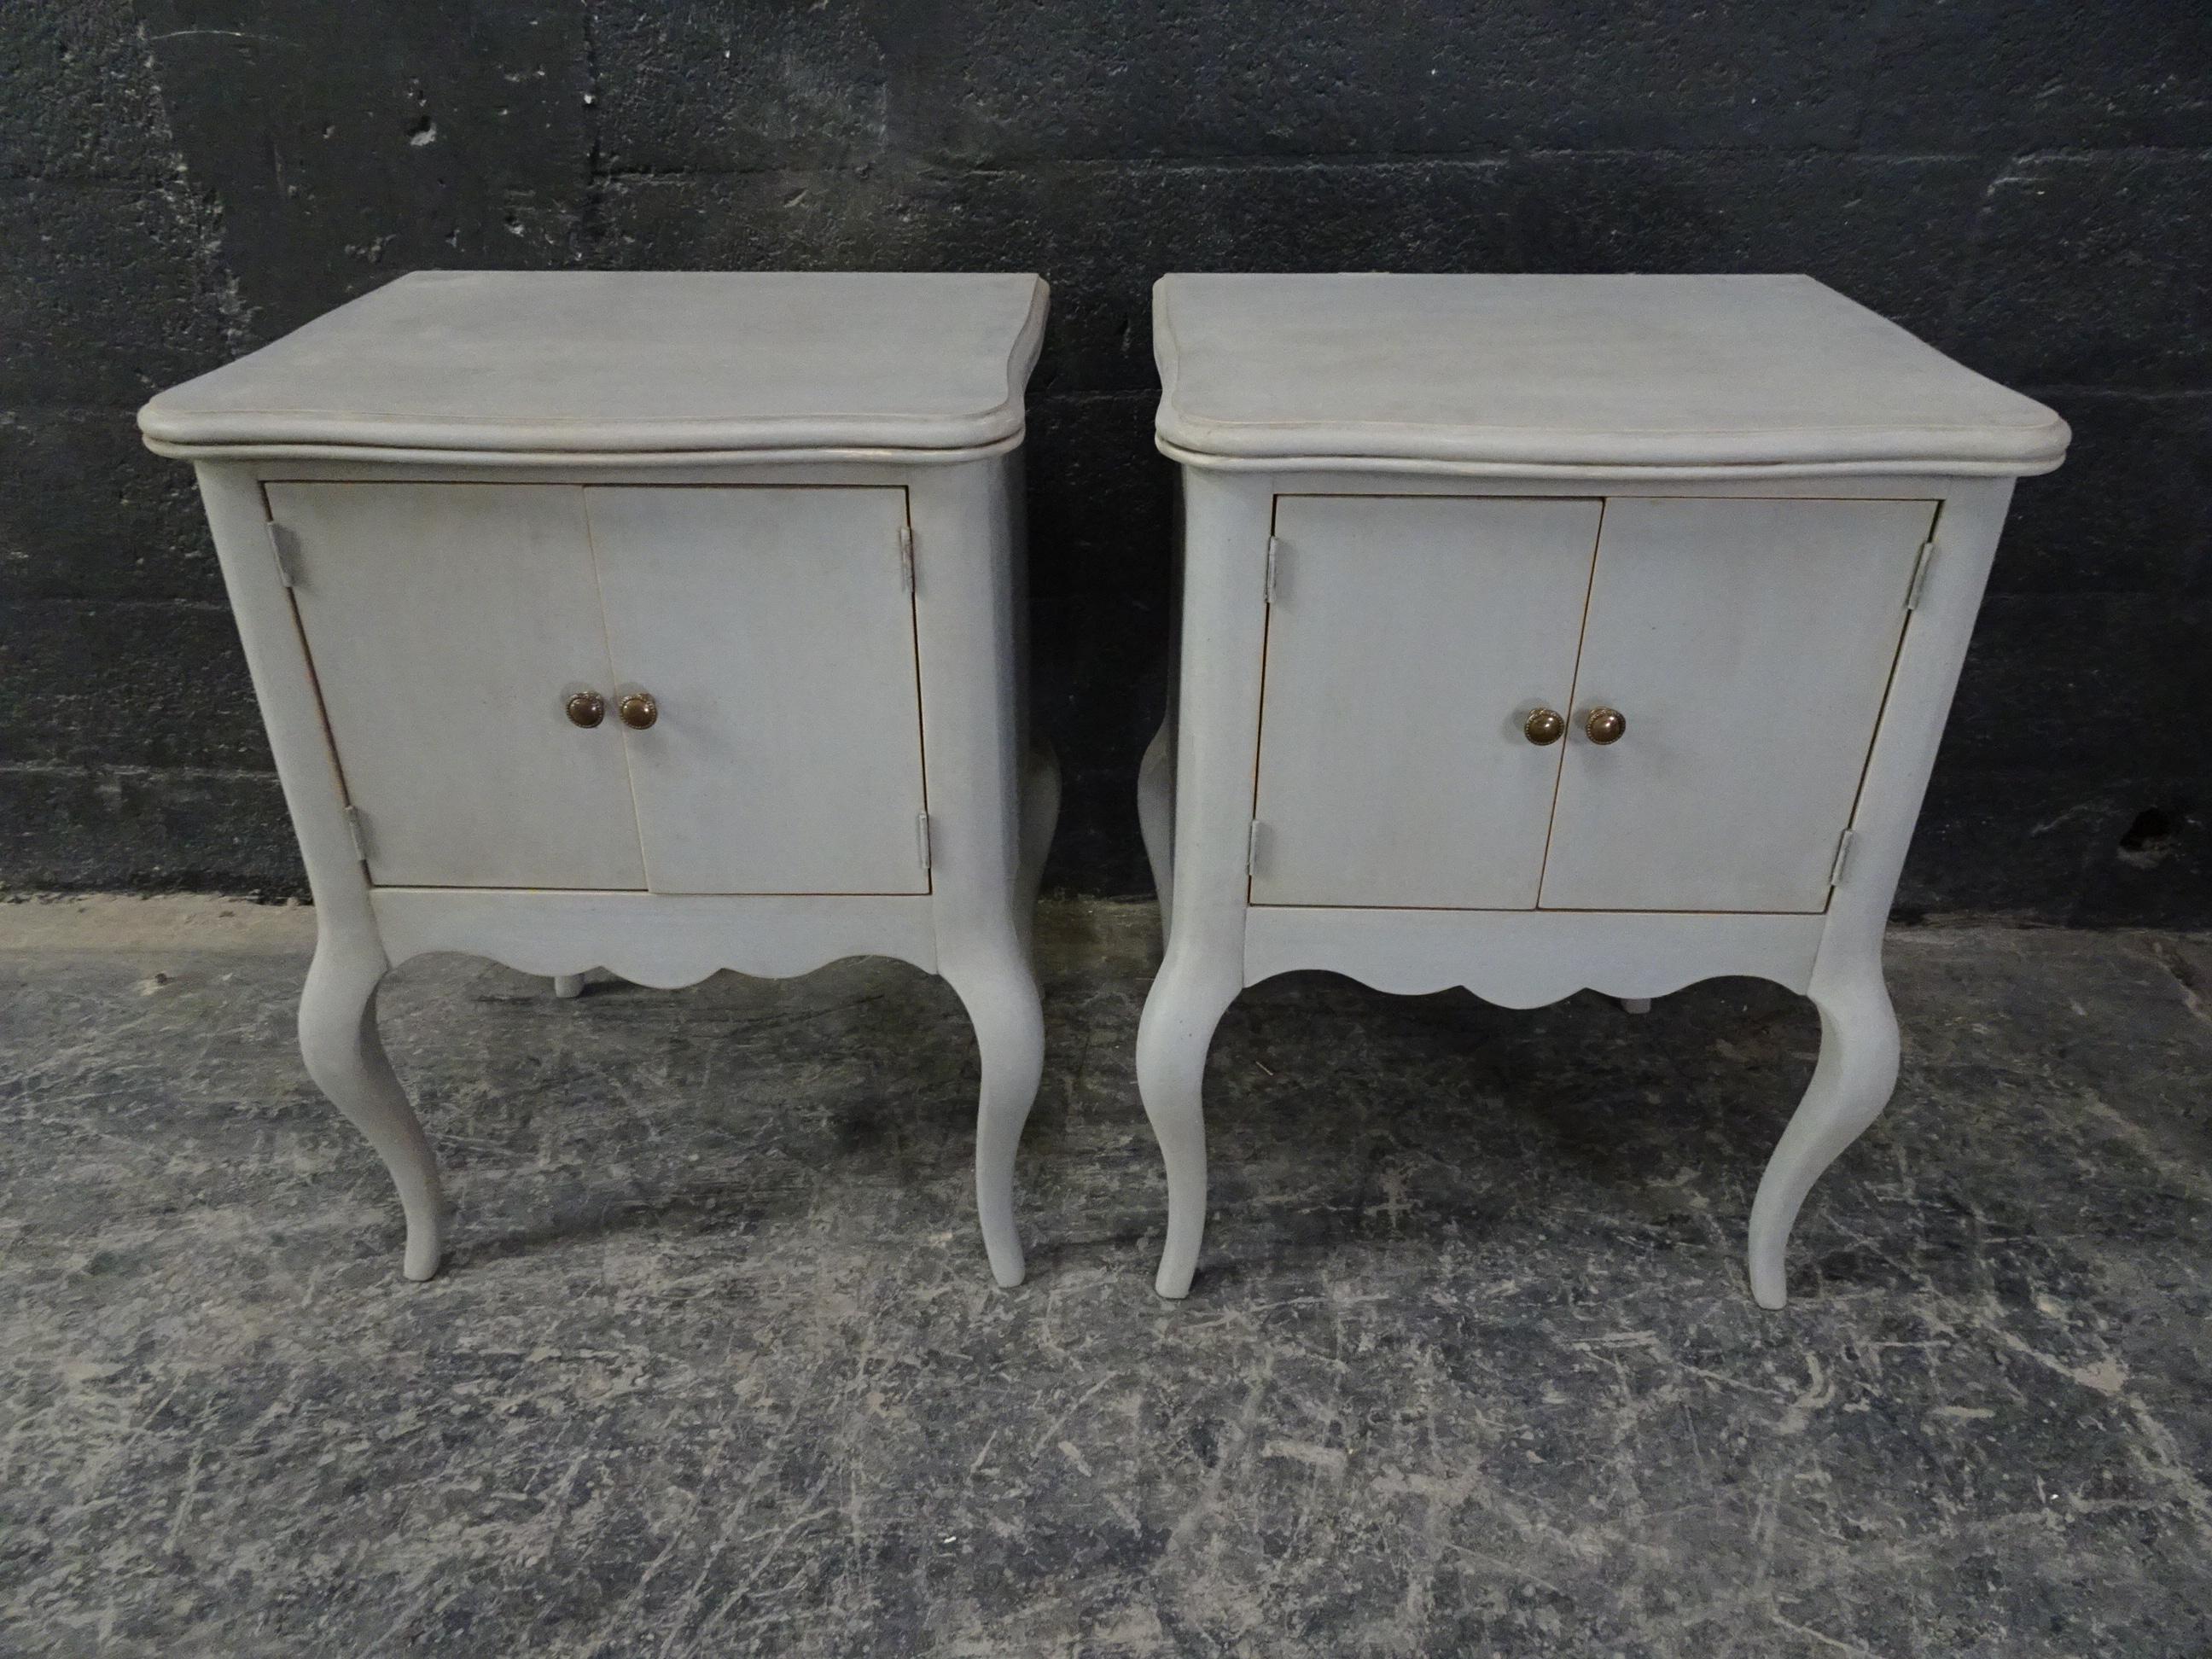 This is a set of 2 Rococo style nightstands. They have been restored and repainted with milk paint.